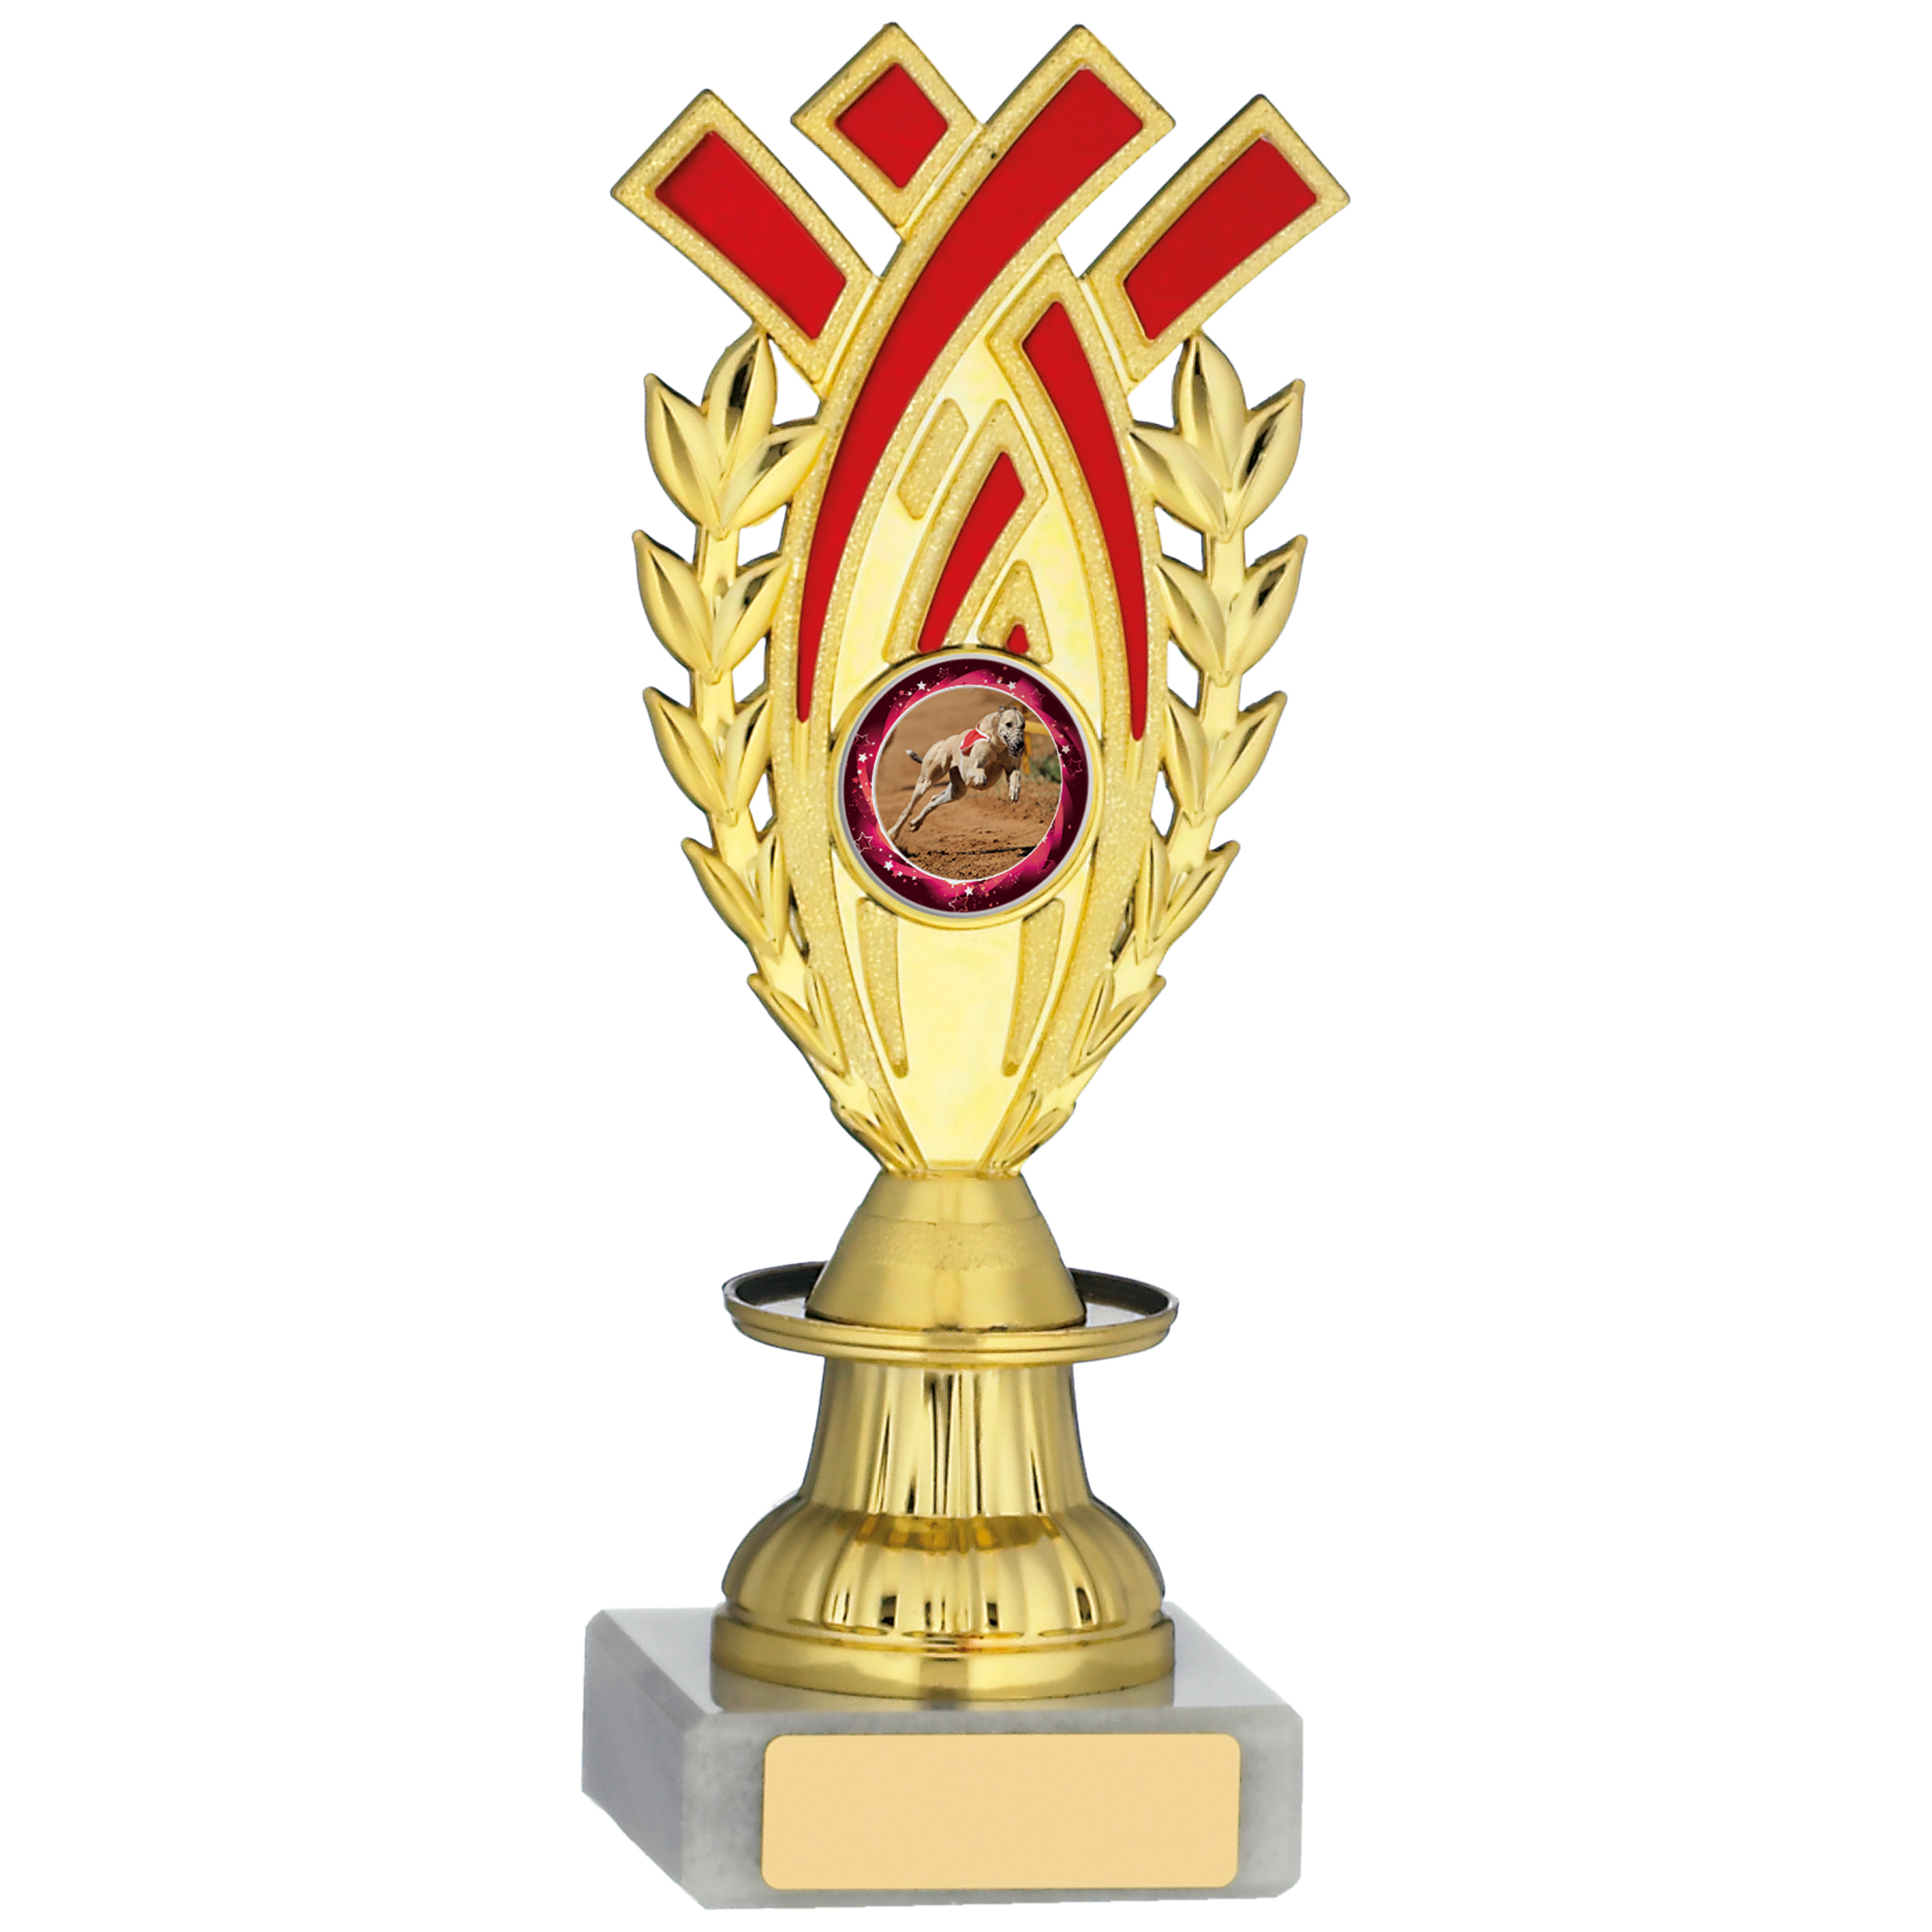 GOLD AND RED TROPHY